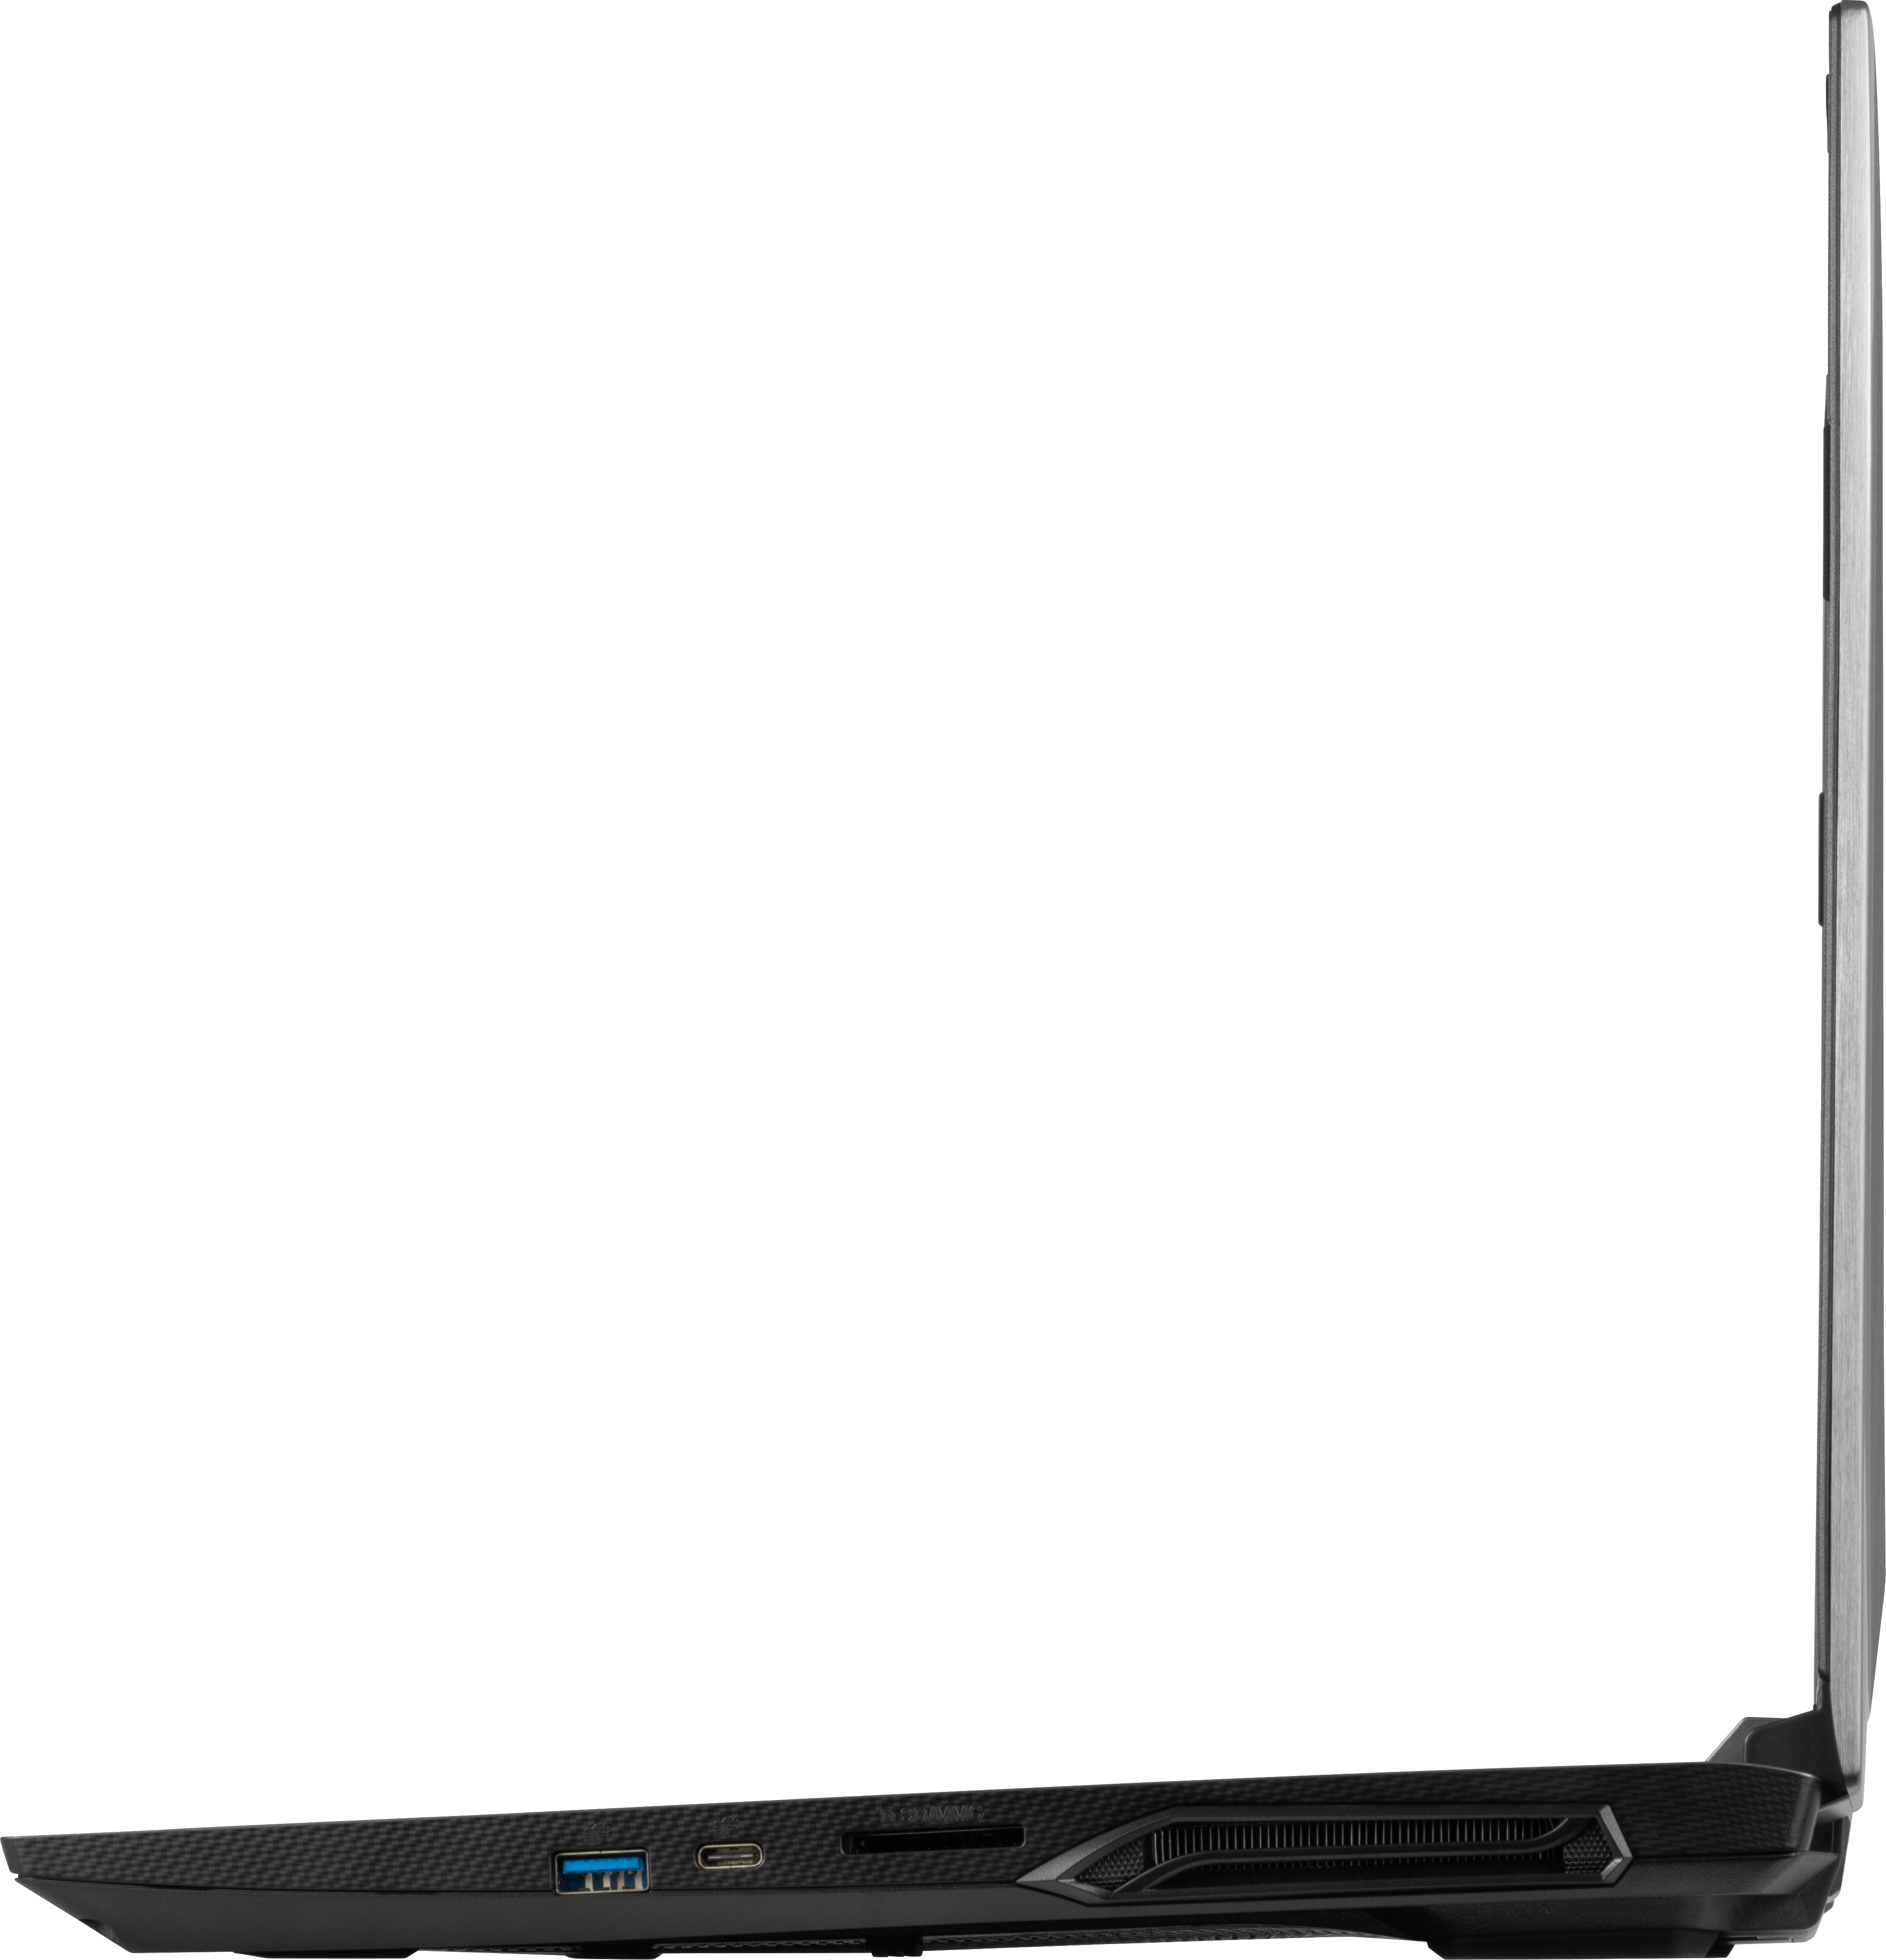 A right profile view of the Gazelle laptop’s ports, including USB, USB-C, and SD card slot.